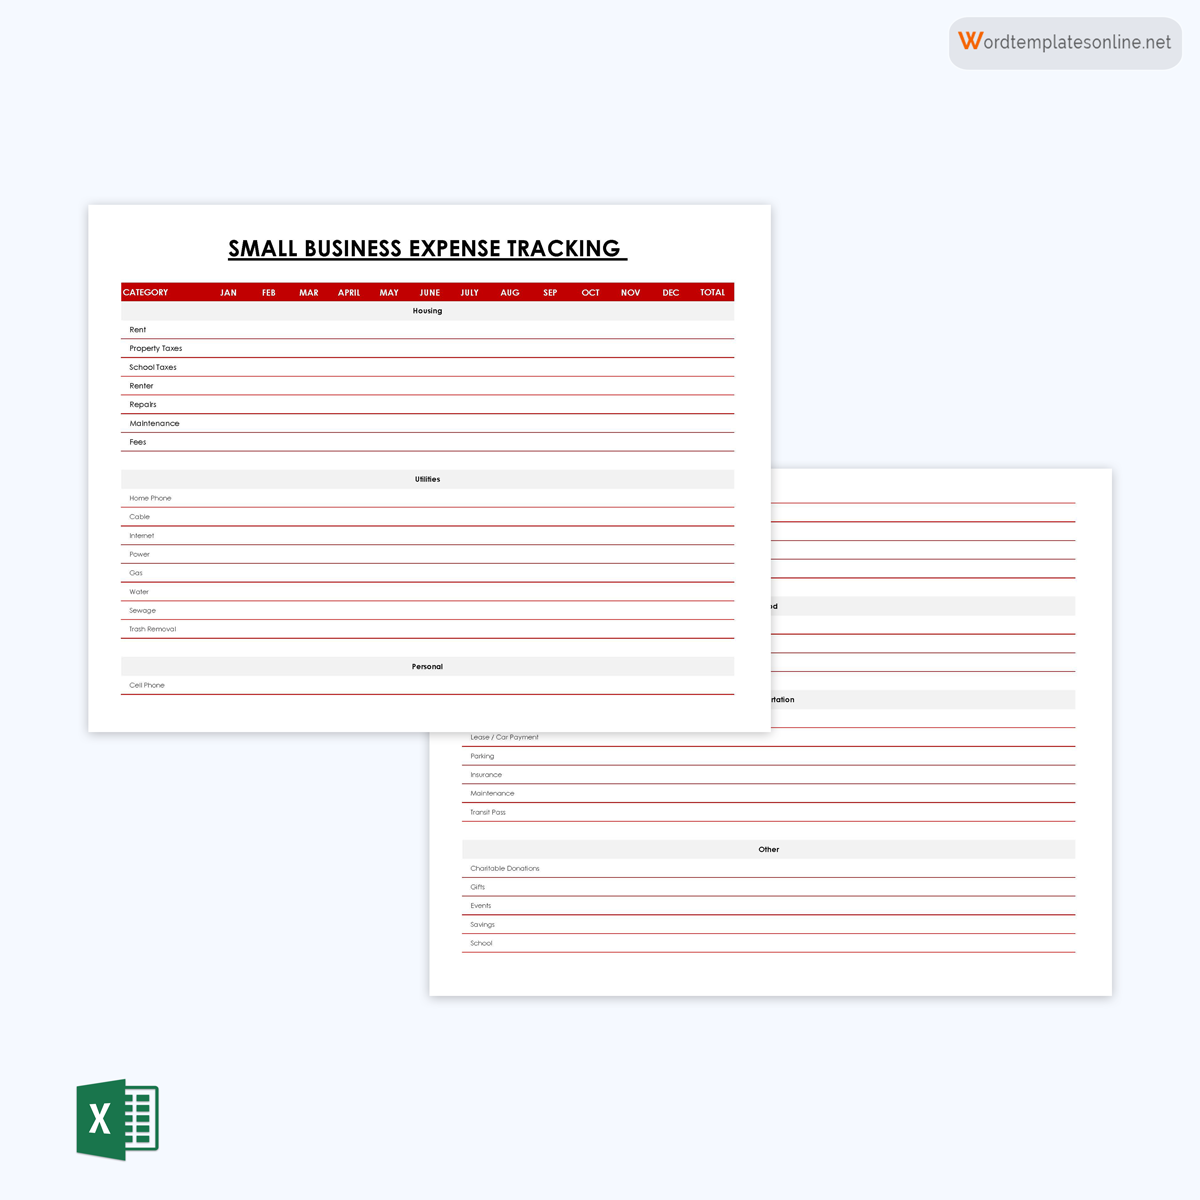 Free Printable Small Business Expense Tracking Report Template 02 as Excel Format